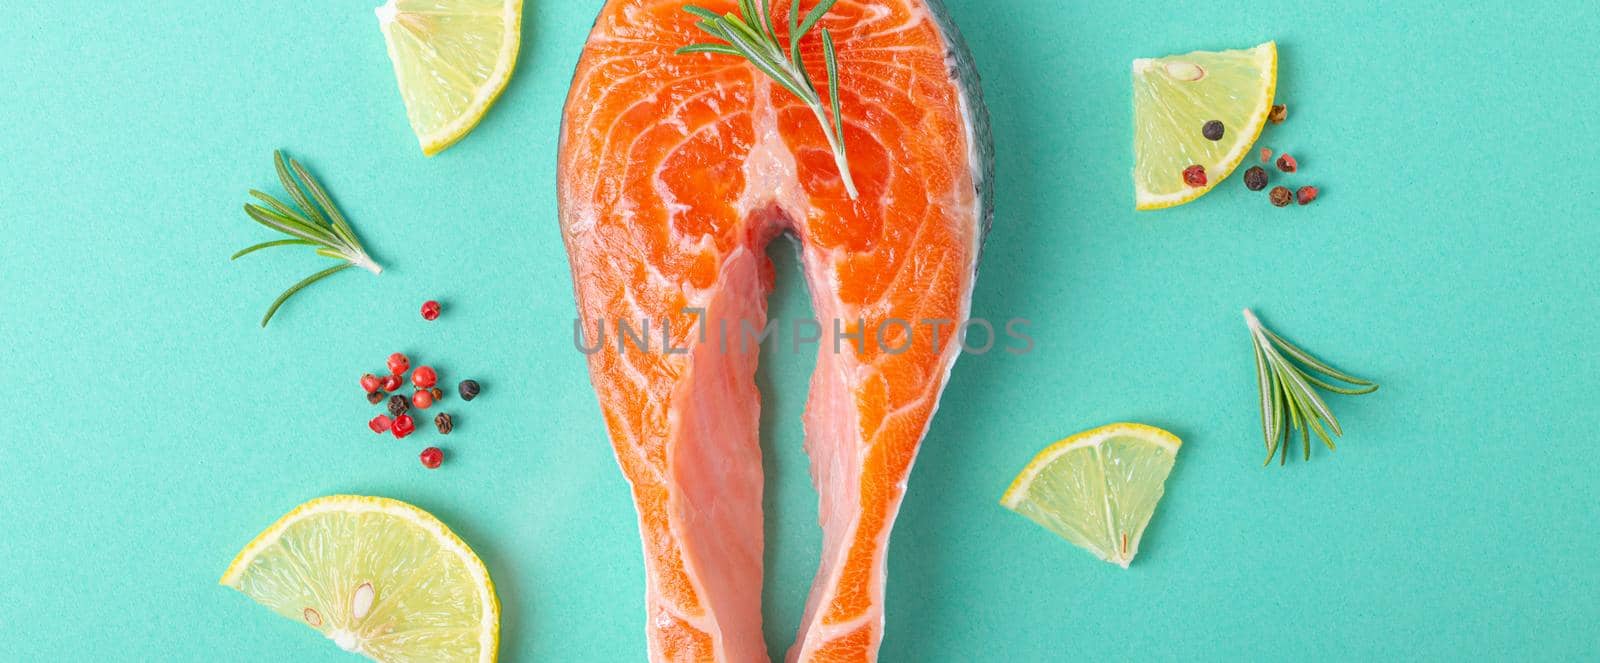 Uncooked raw fresh fish salmon steak top view on blue background with rosemary, lemon wedges and spices, delicacy healthy fish cooking and nutrition concept flat lay